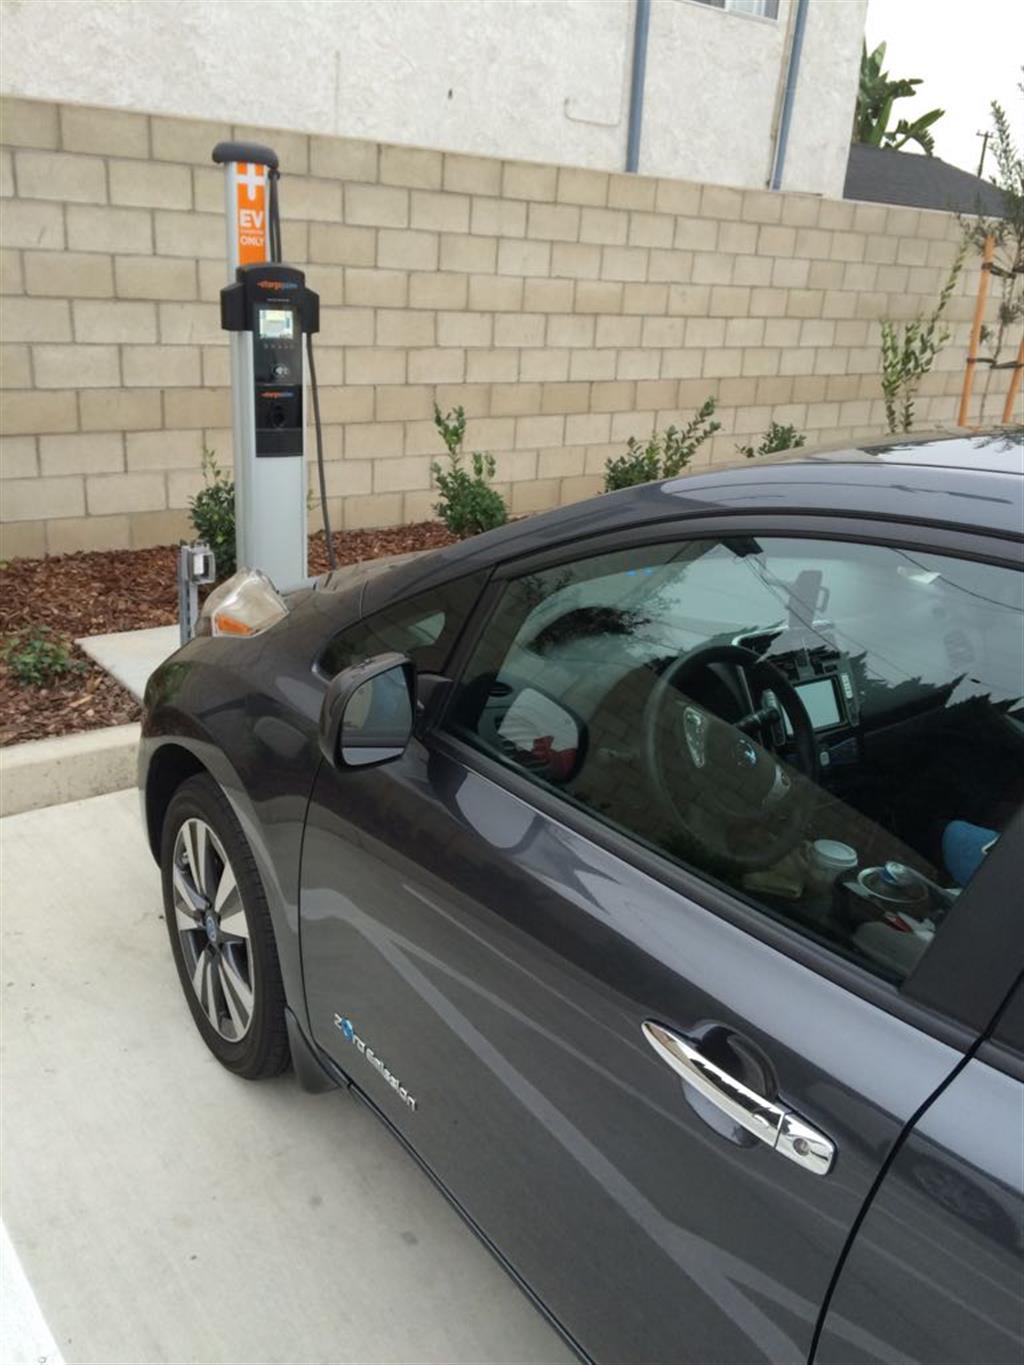 EV Charging Station at Tsunami Express Car Wash -  ChargePoint Level 2 EV Charger, CA 90650
http: